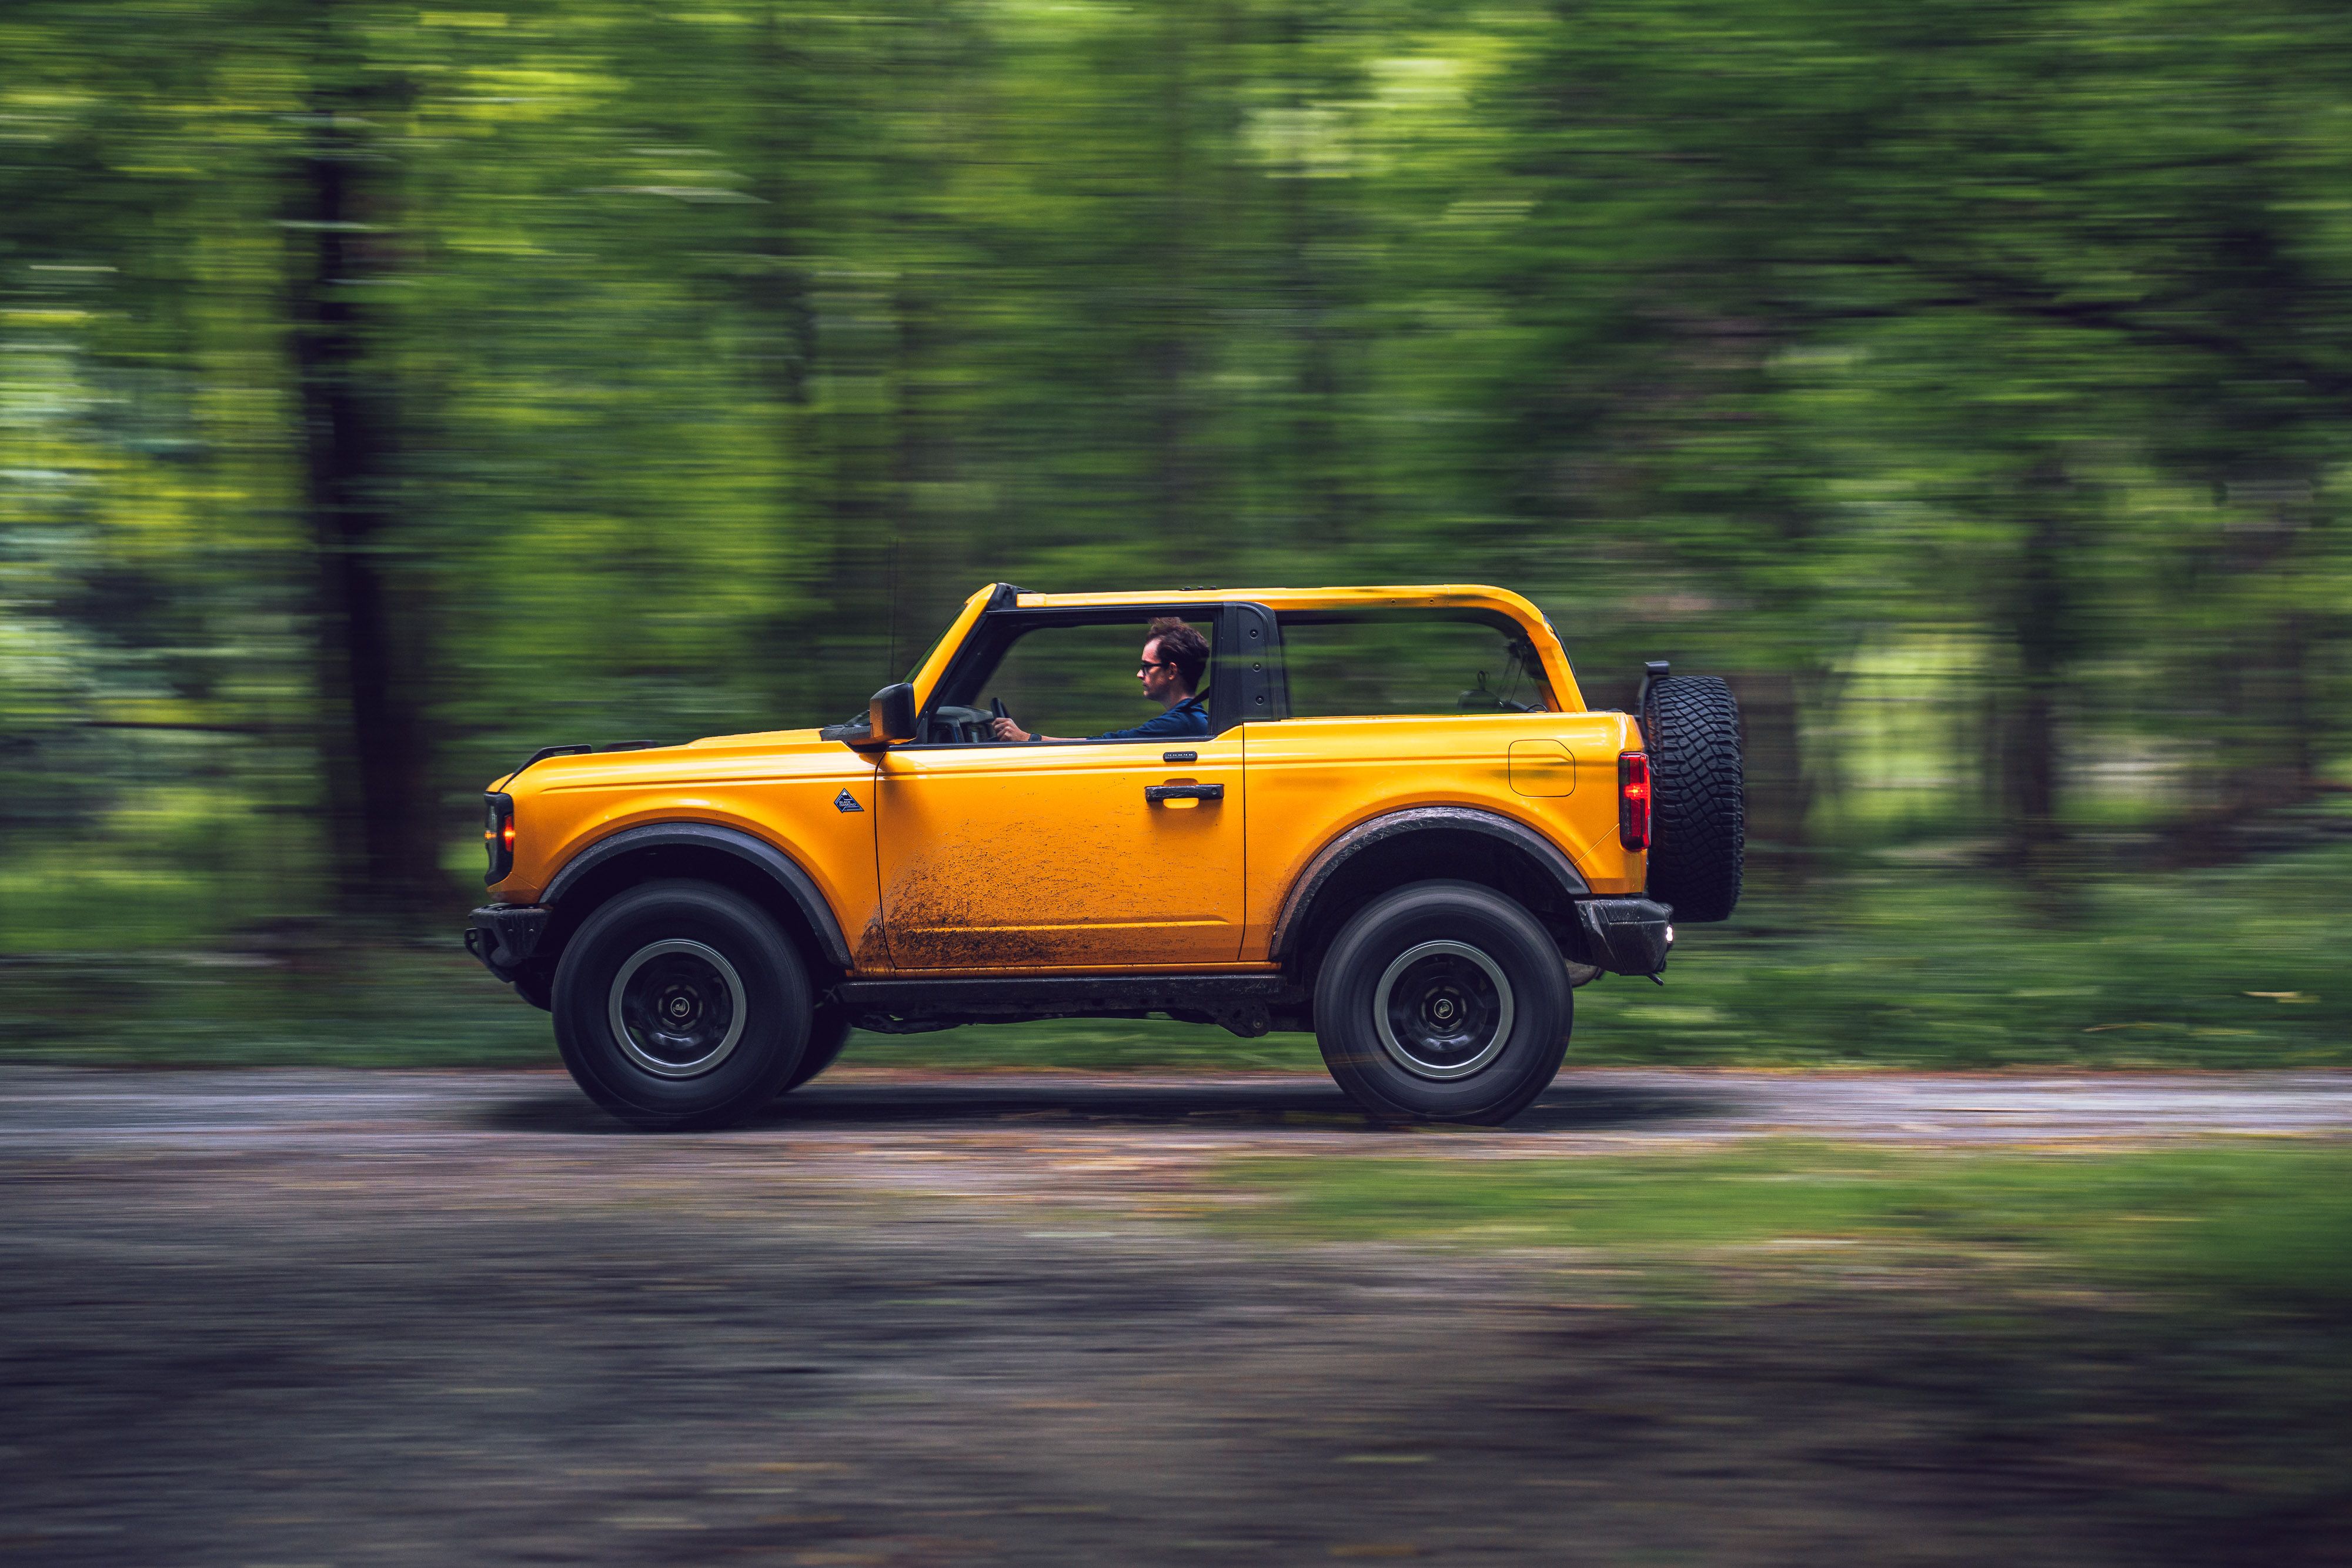 2021 Ford Bronco Review: It Made Me Understand the Wrangler